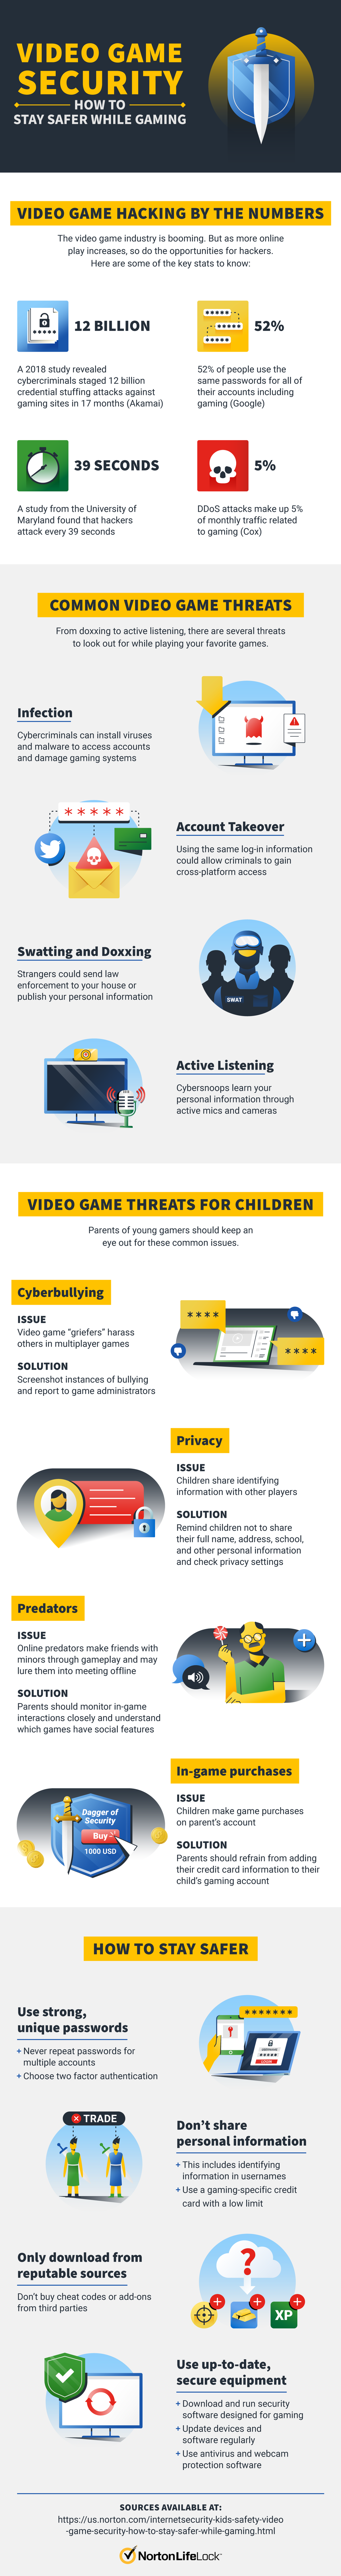 Video game security revised